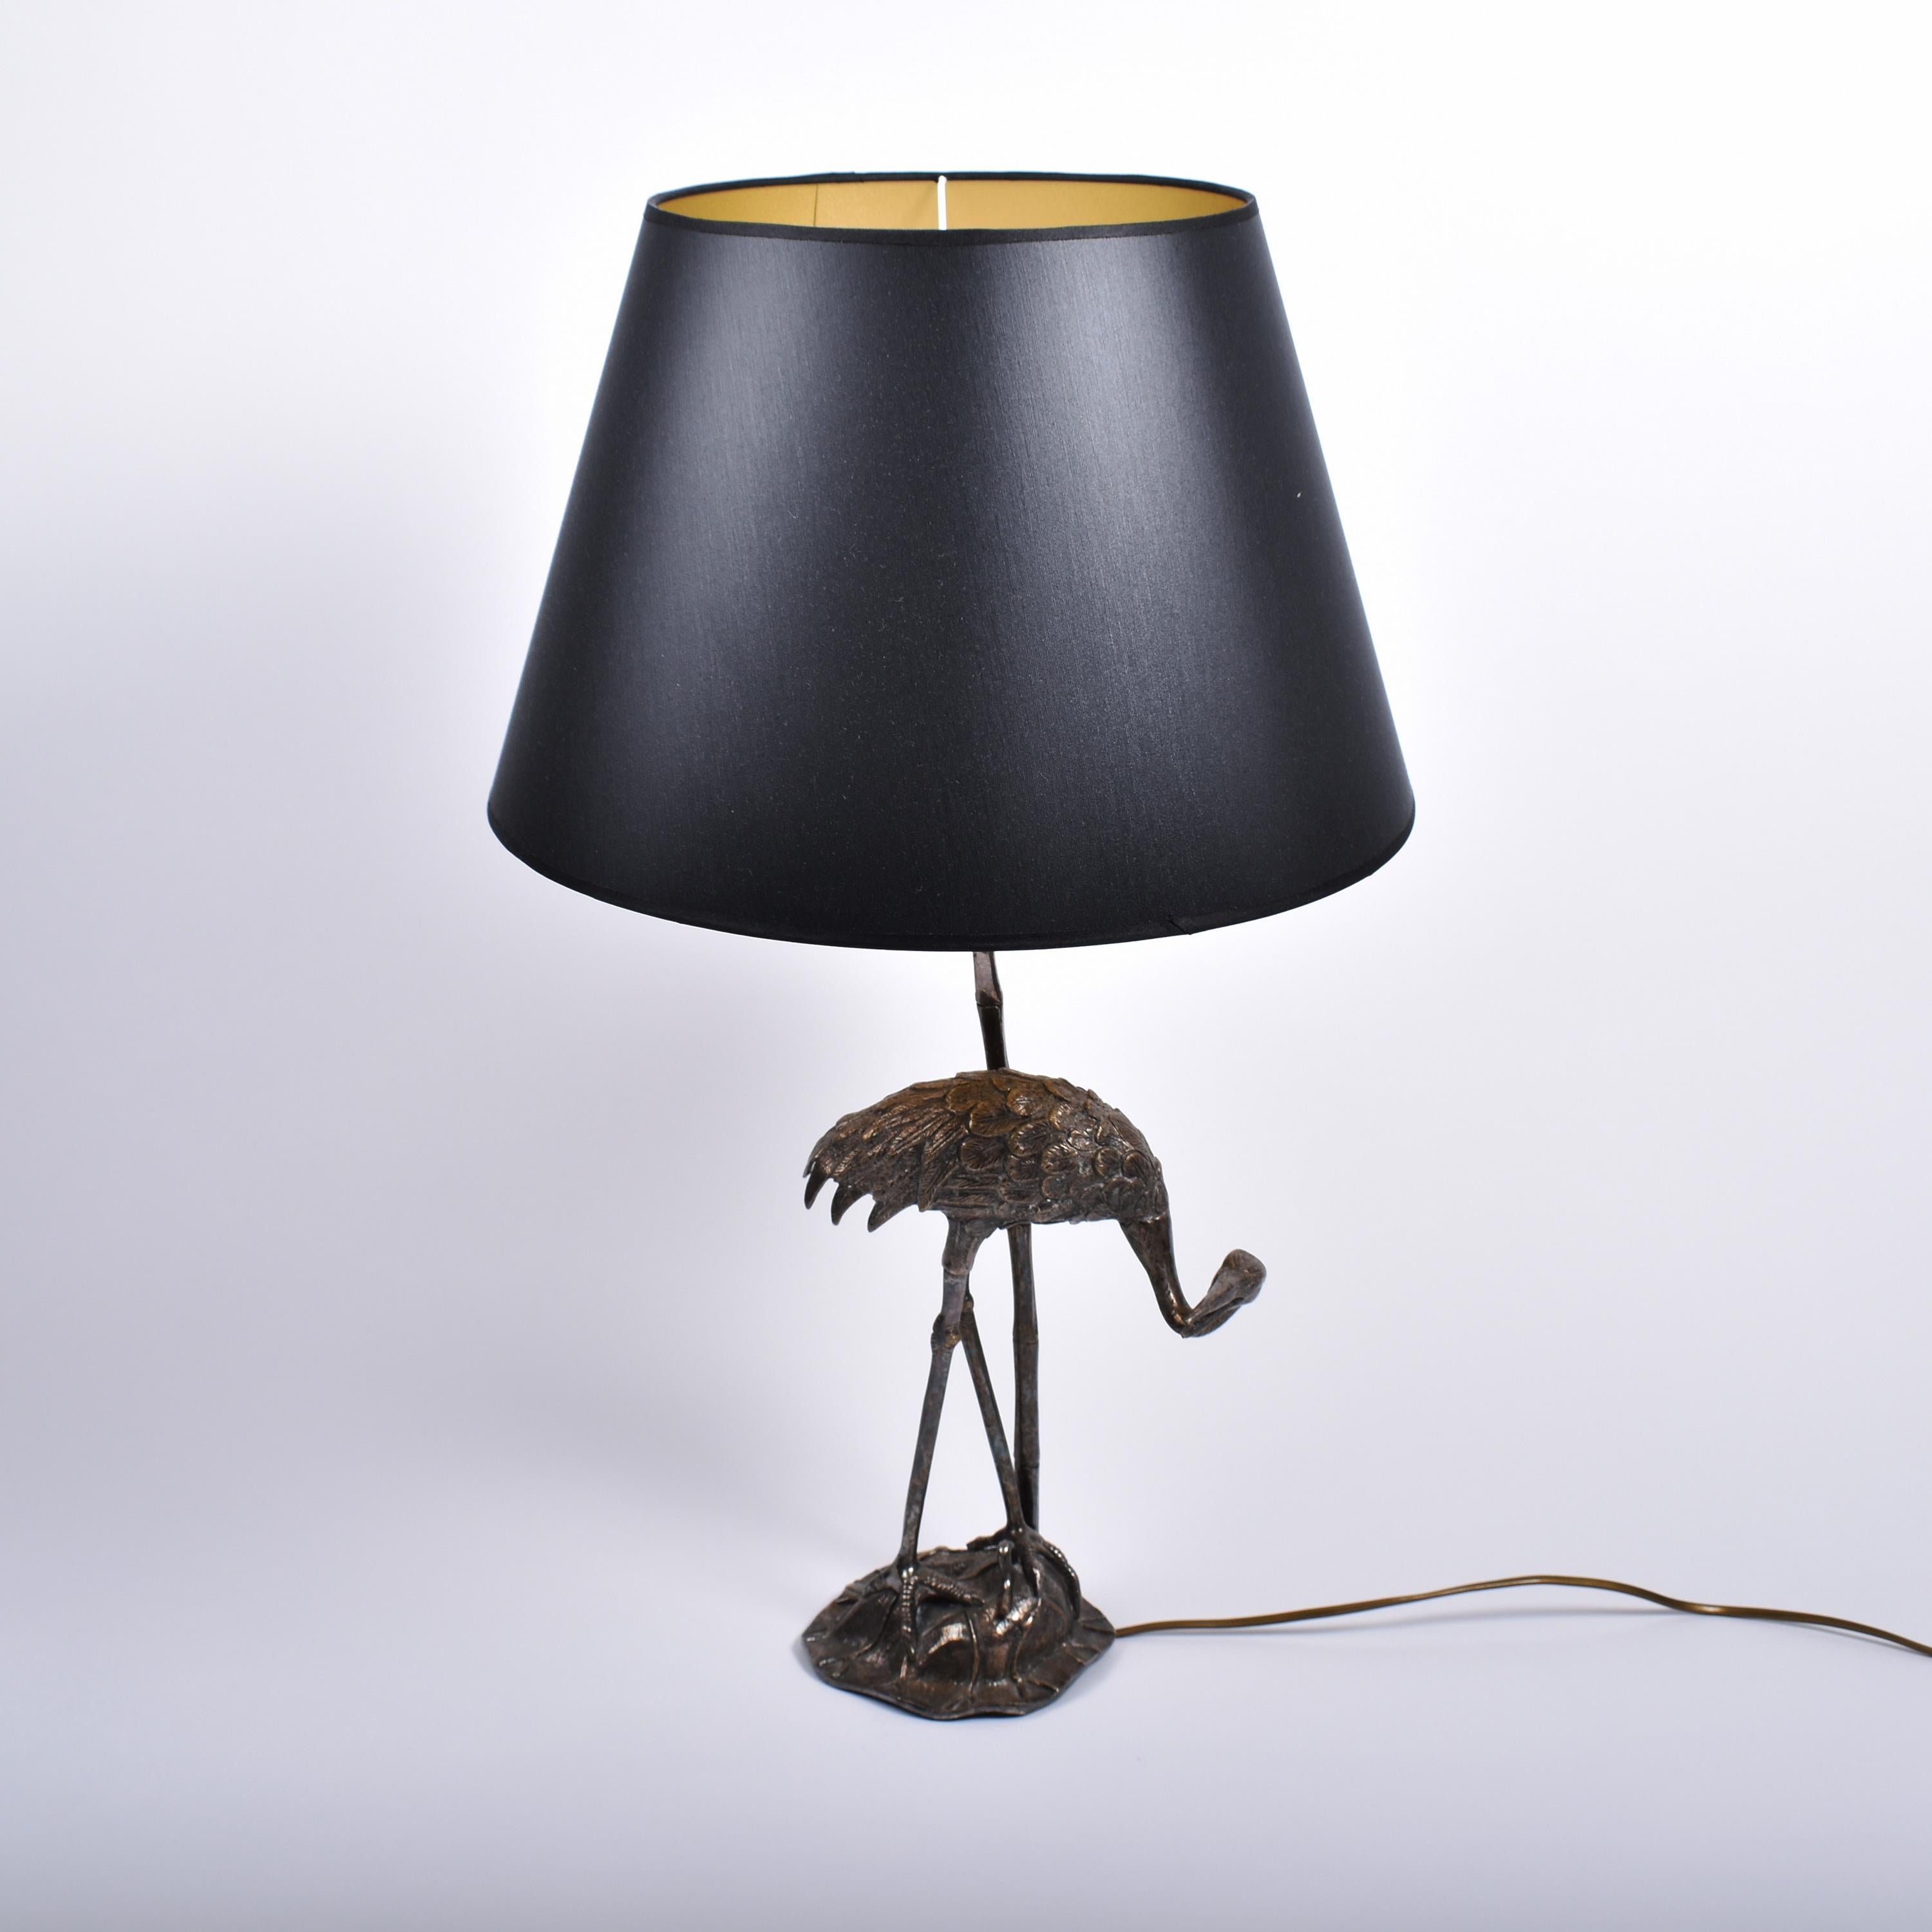 French Mid-Century Modern Silvered Ibis Table Lamp by Maison Baguès, France, 1960